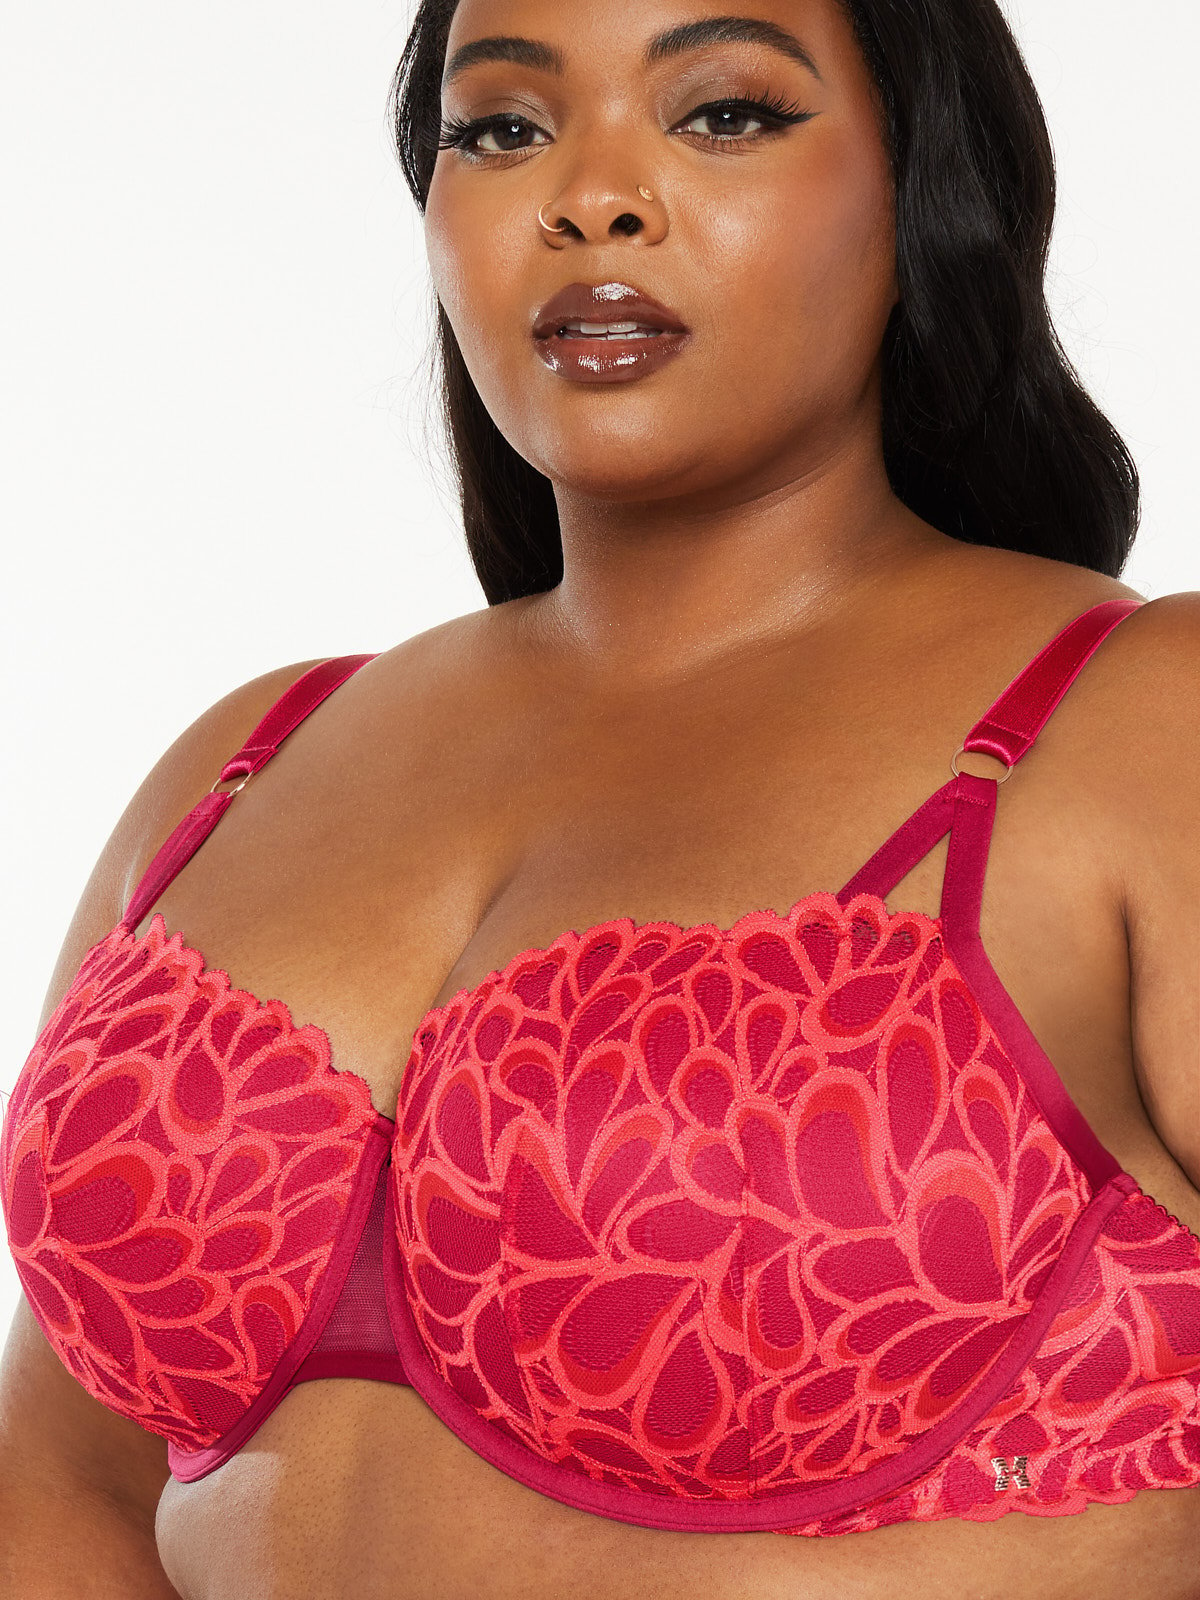 🔥Ignite the Beauty of Confidence! Plus-Size Red Lace Bra, Black Friday  Discount up to 50% off! #PlusSizeBra #RedLace #BlackFridayDeal